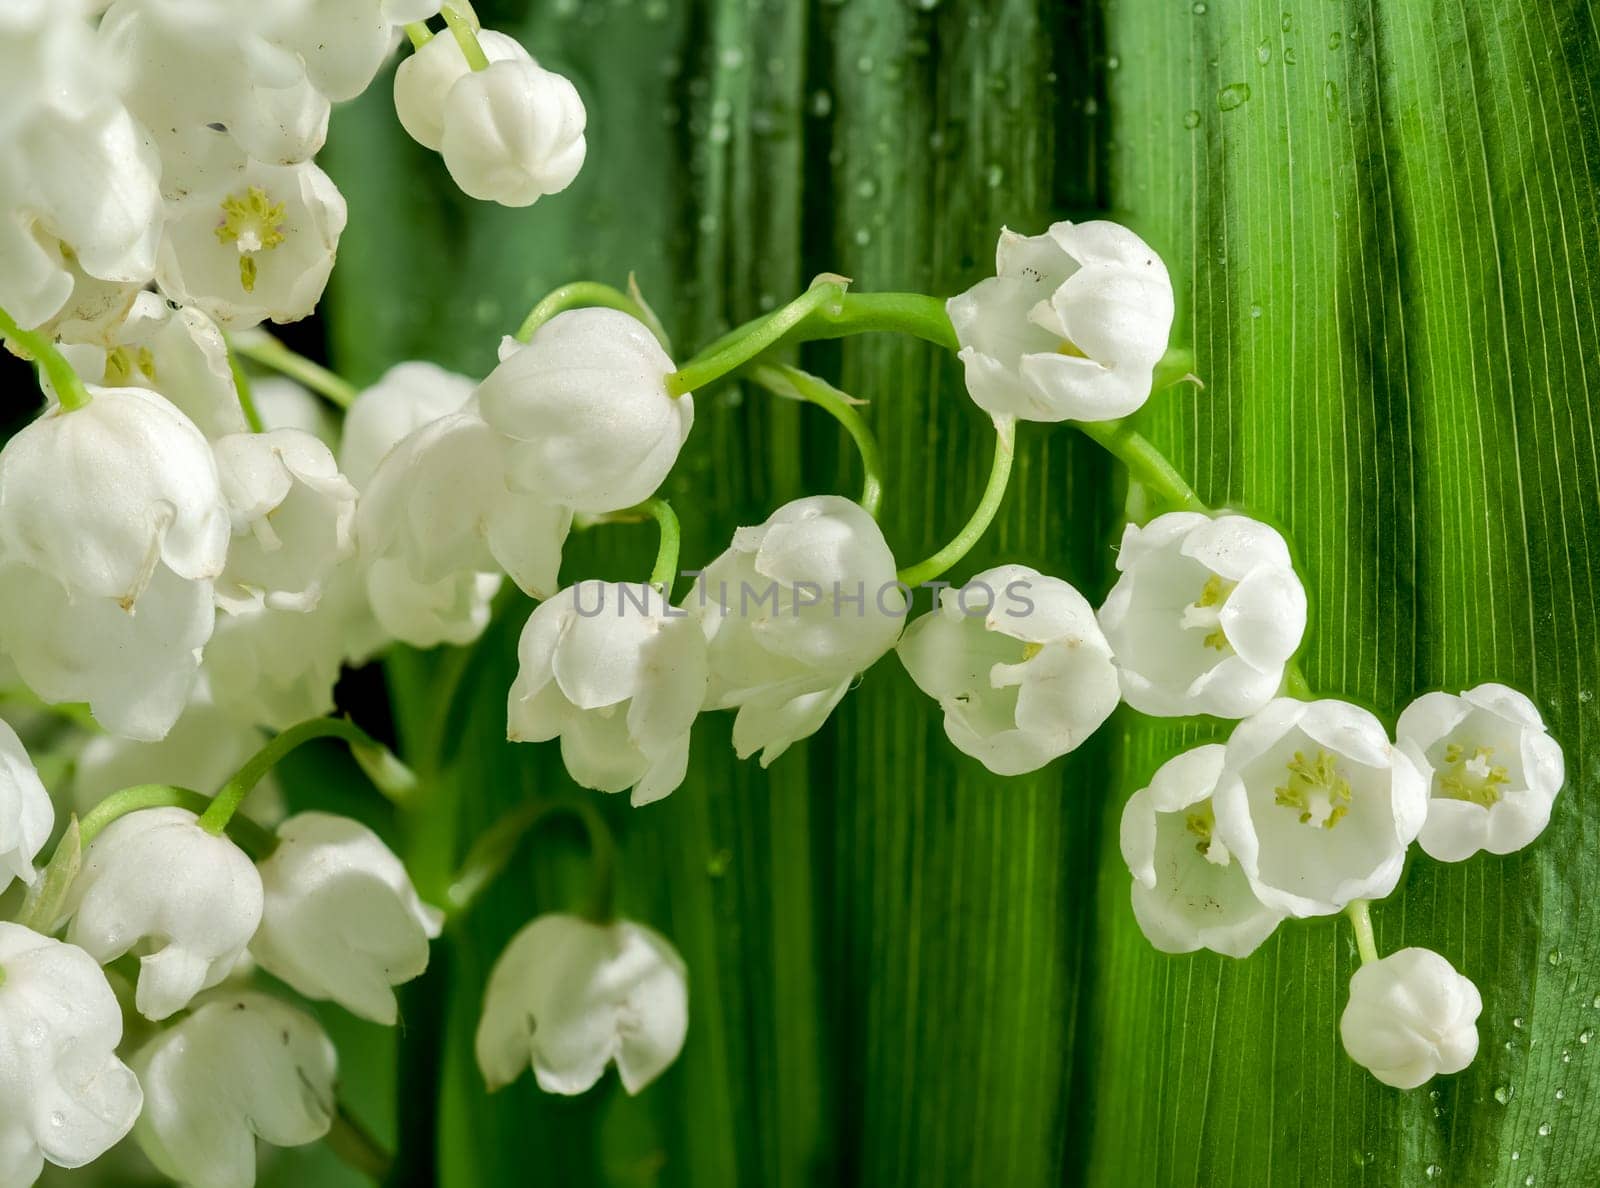 Blooming Lily of the valley flowers by Multipedia